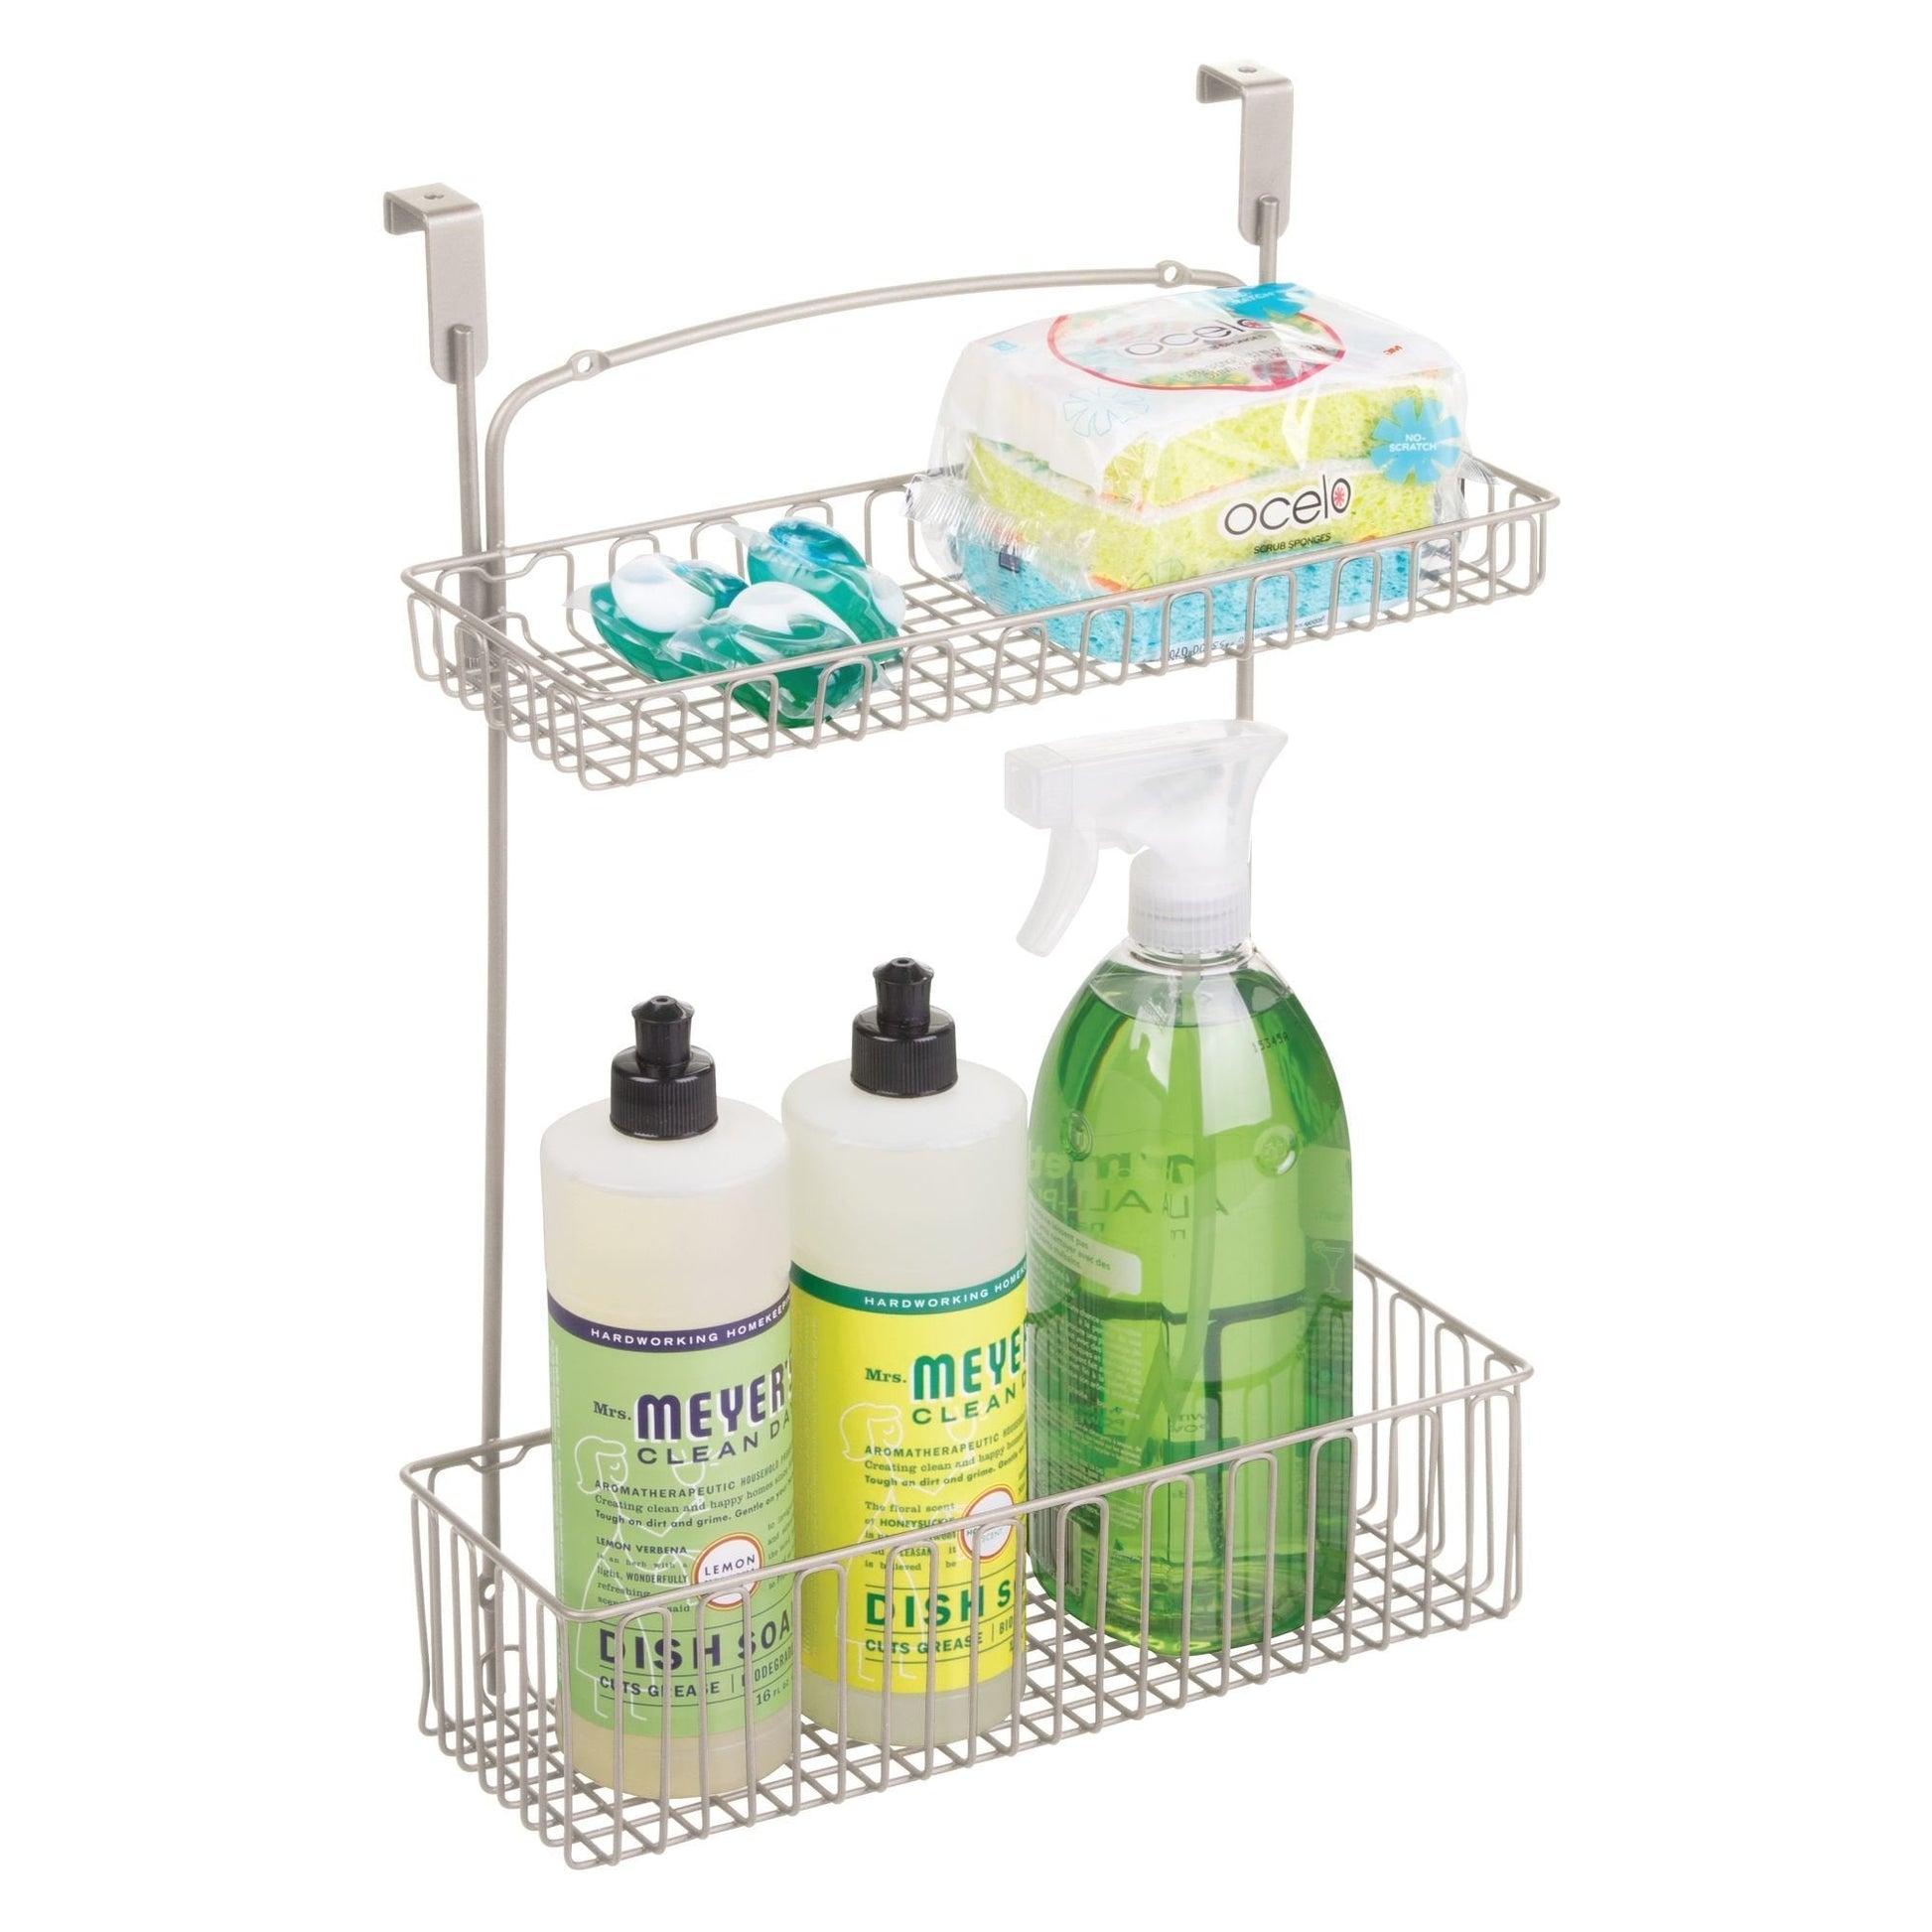 Products metal farmhouse over cabinet kitchen storage organizer holder or basket hang over cabinet doors in kitchen pantry holds dish soap window cleaner sponges satin